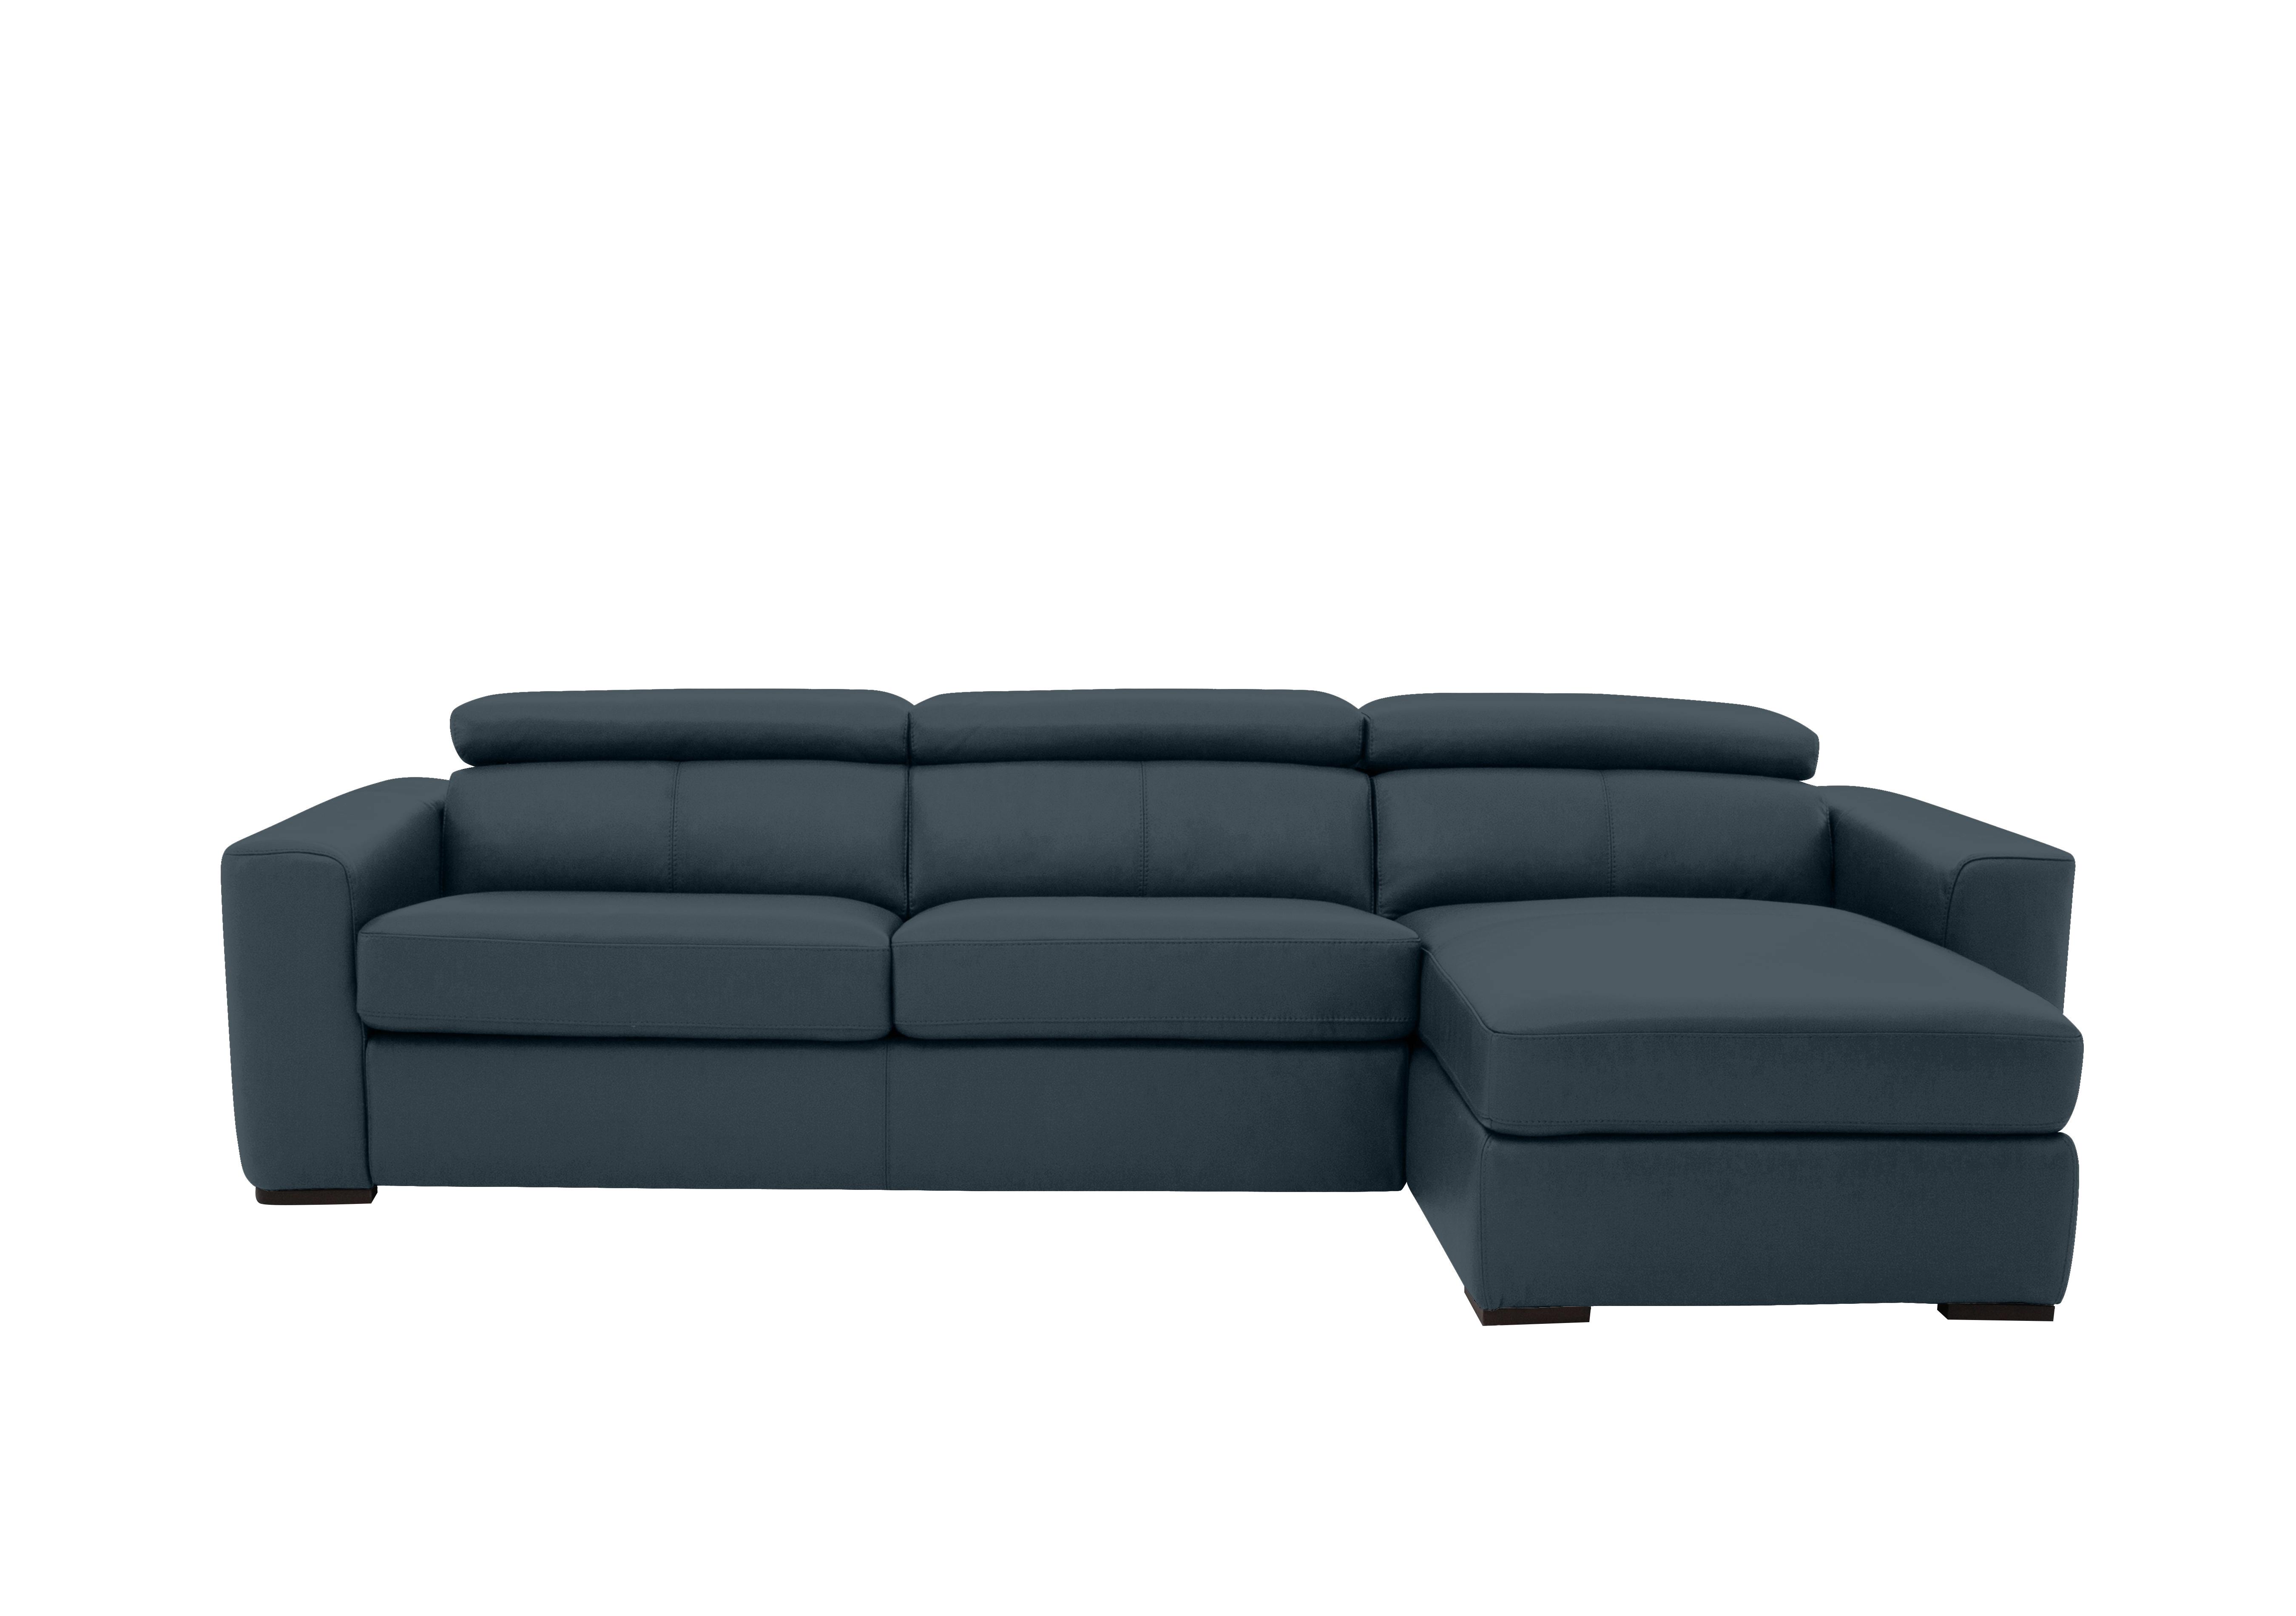 Infinity Leather Corner Chaise Sofa with Storage in Nc-313e Ocean Blue on Furniture Village